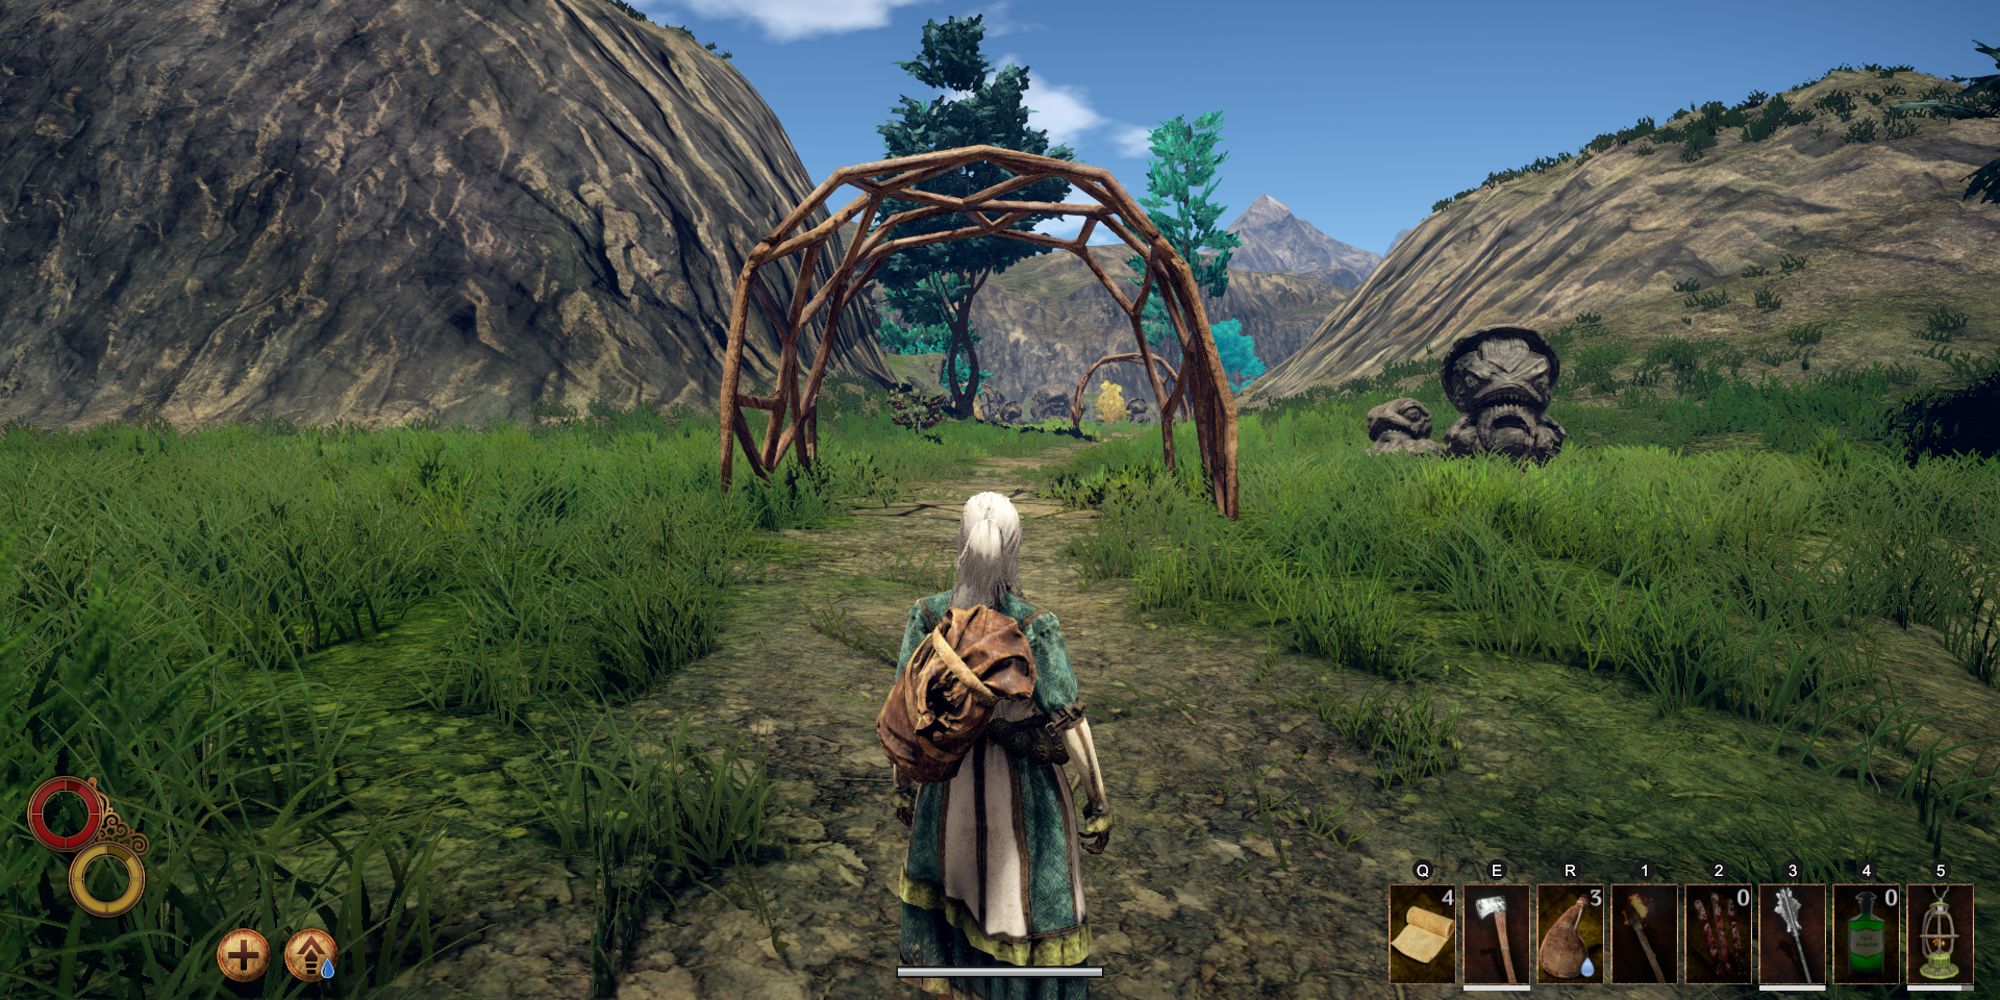 player looking at path with wooden arches